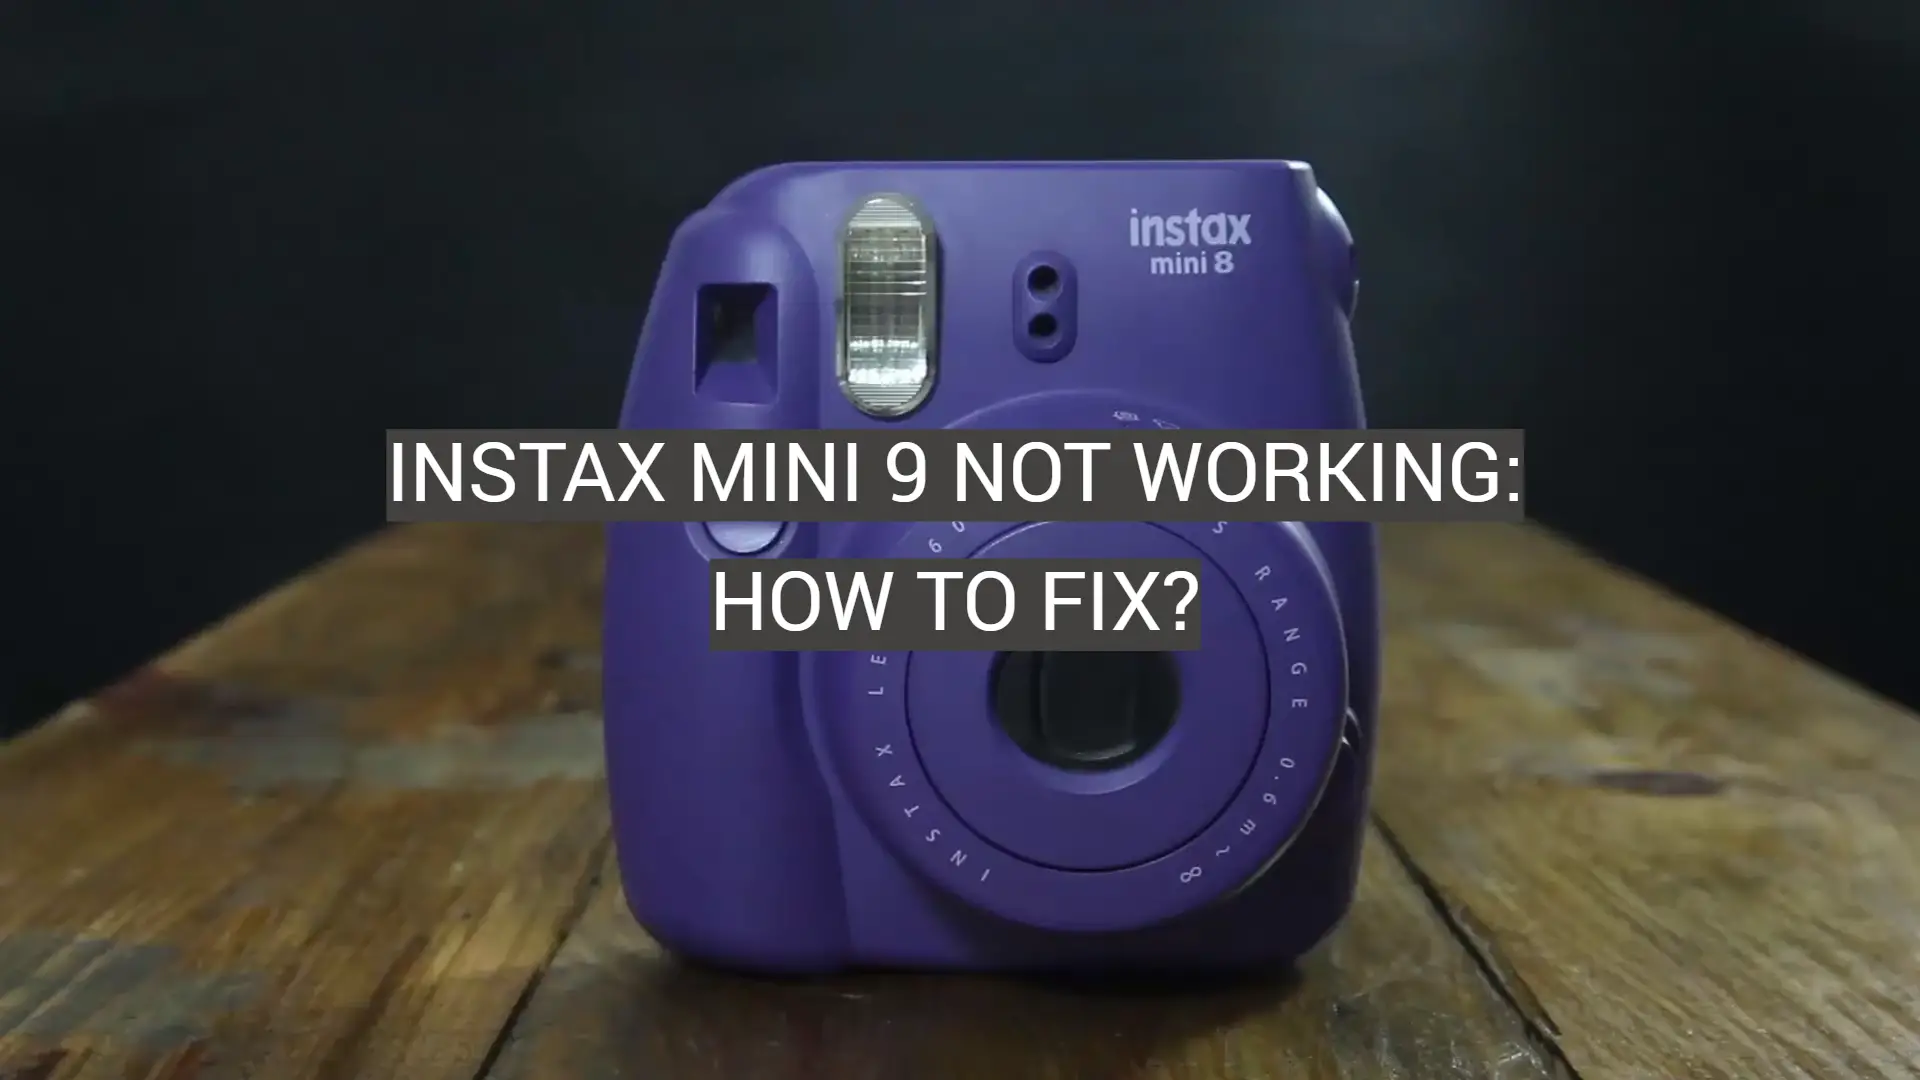 Instax Mini 9 Not Working: How to Fix?